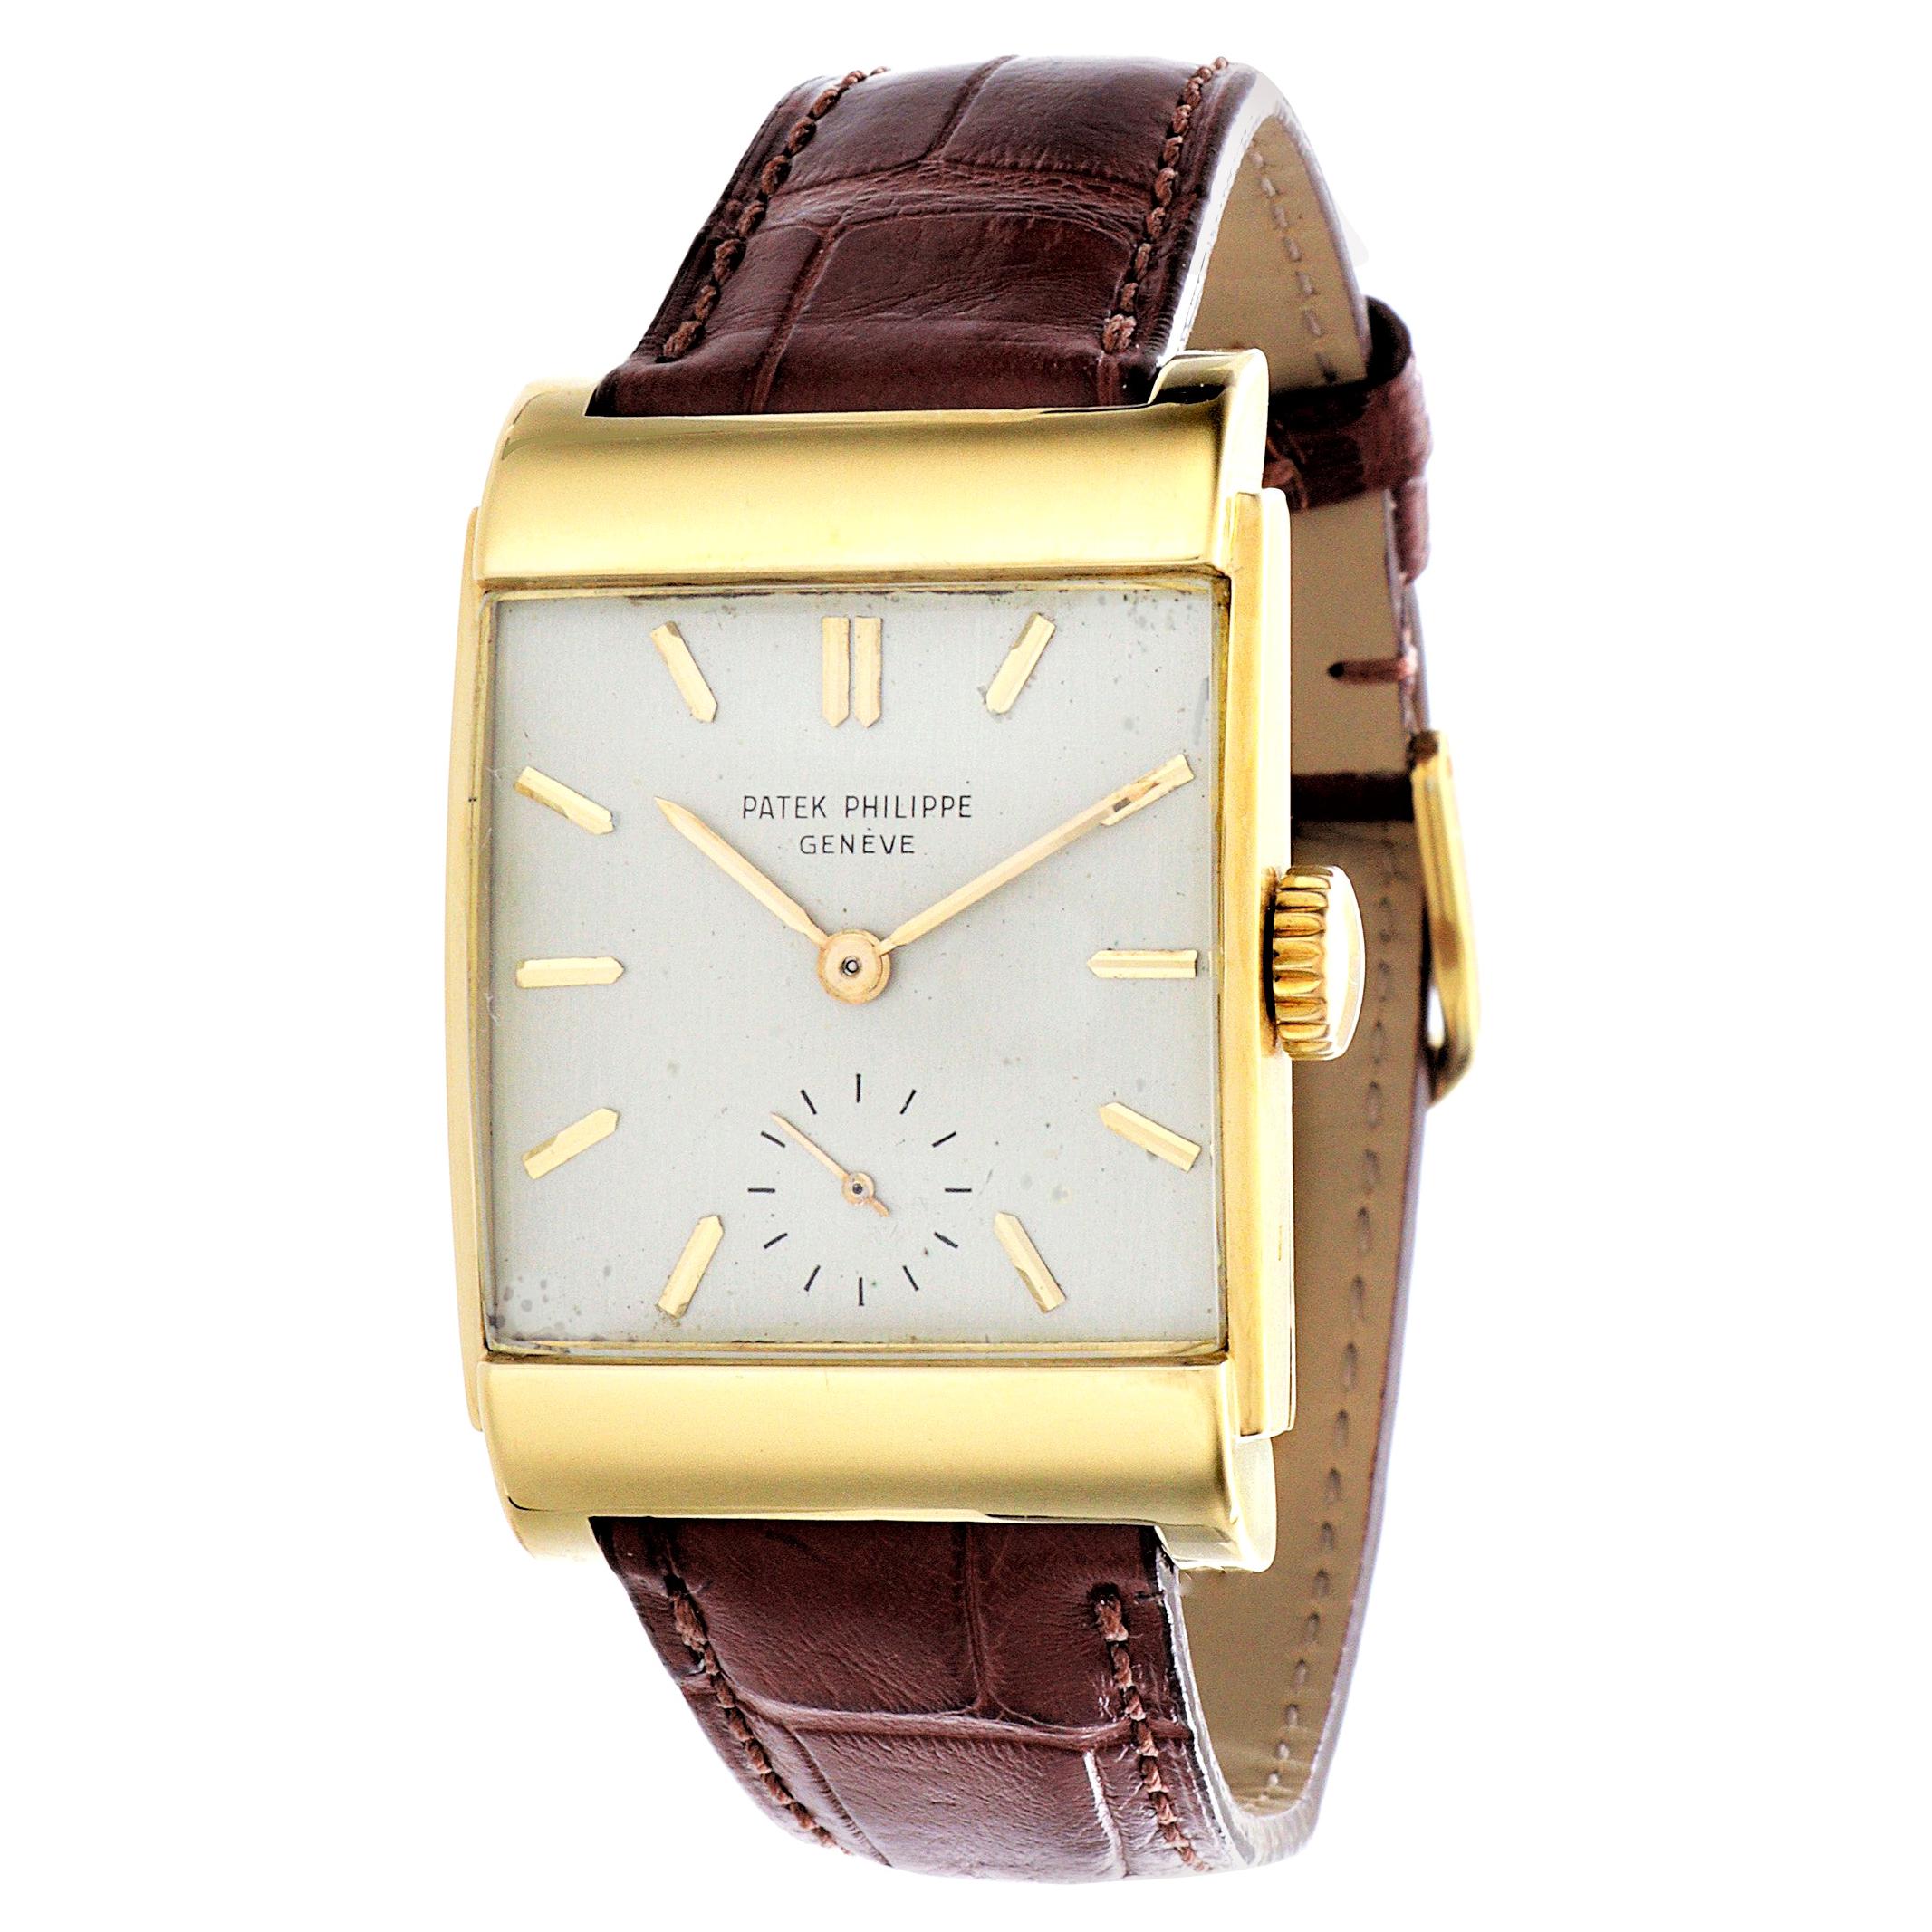 Patek Philippe 2479J Curved Domed Rectangular Watch with Stepped Case Circa 1950